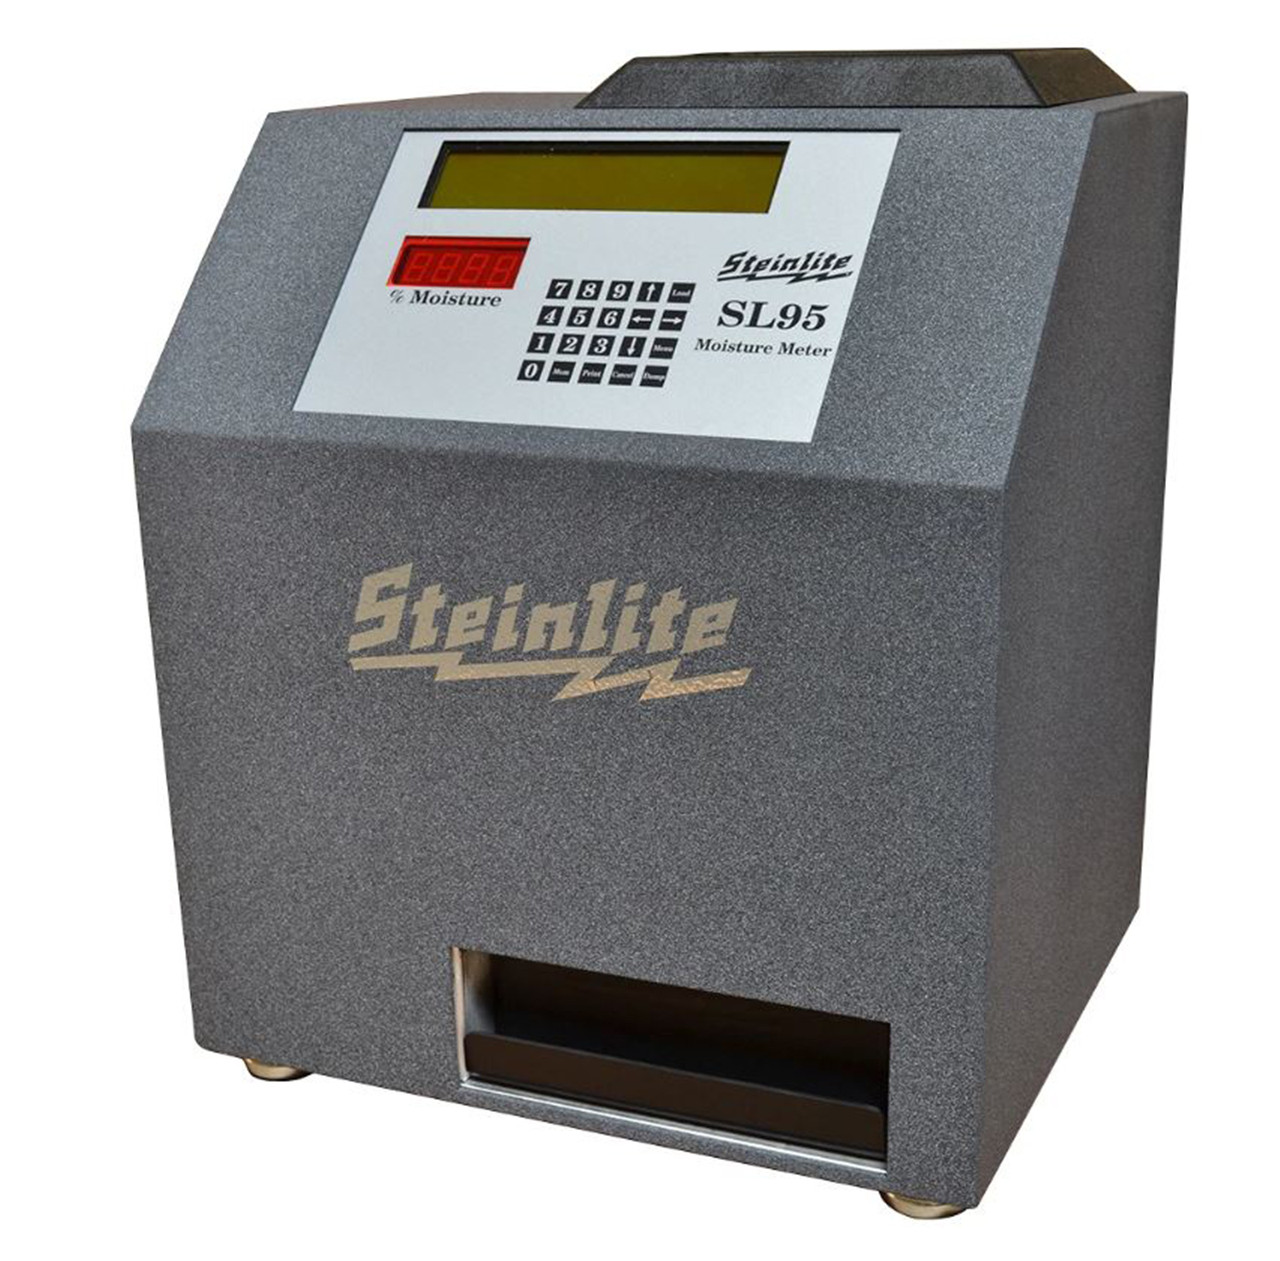 A Steinlite Moisture Tester with LCD display and user friendly interface